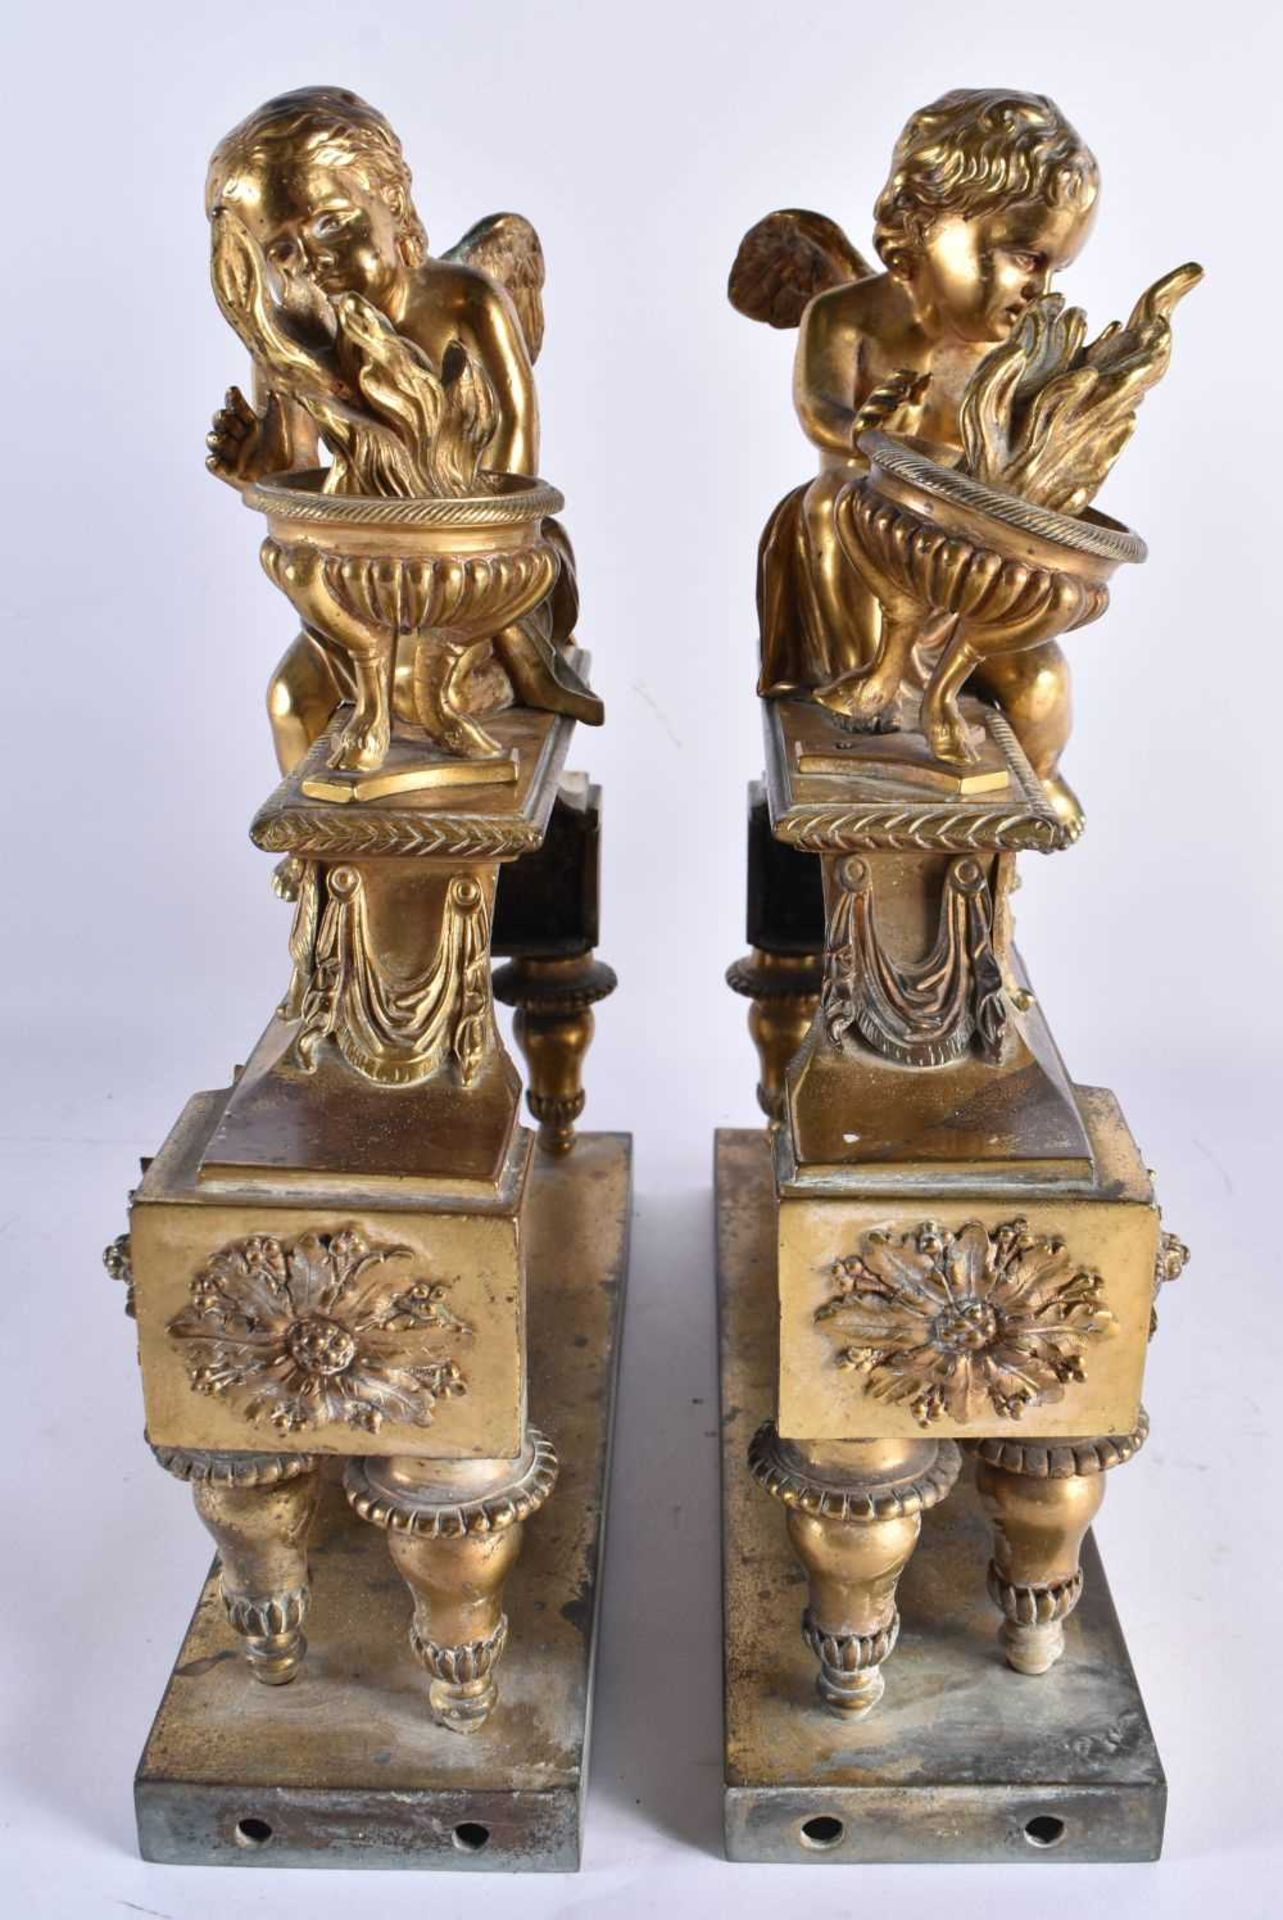 A PAIR OF EARLY 19TH CENTURY FRENCH ORMOLU FIRESIDE COMPANIONS formed as putti beside flaming vases, - Image 4 of 6